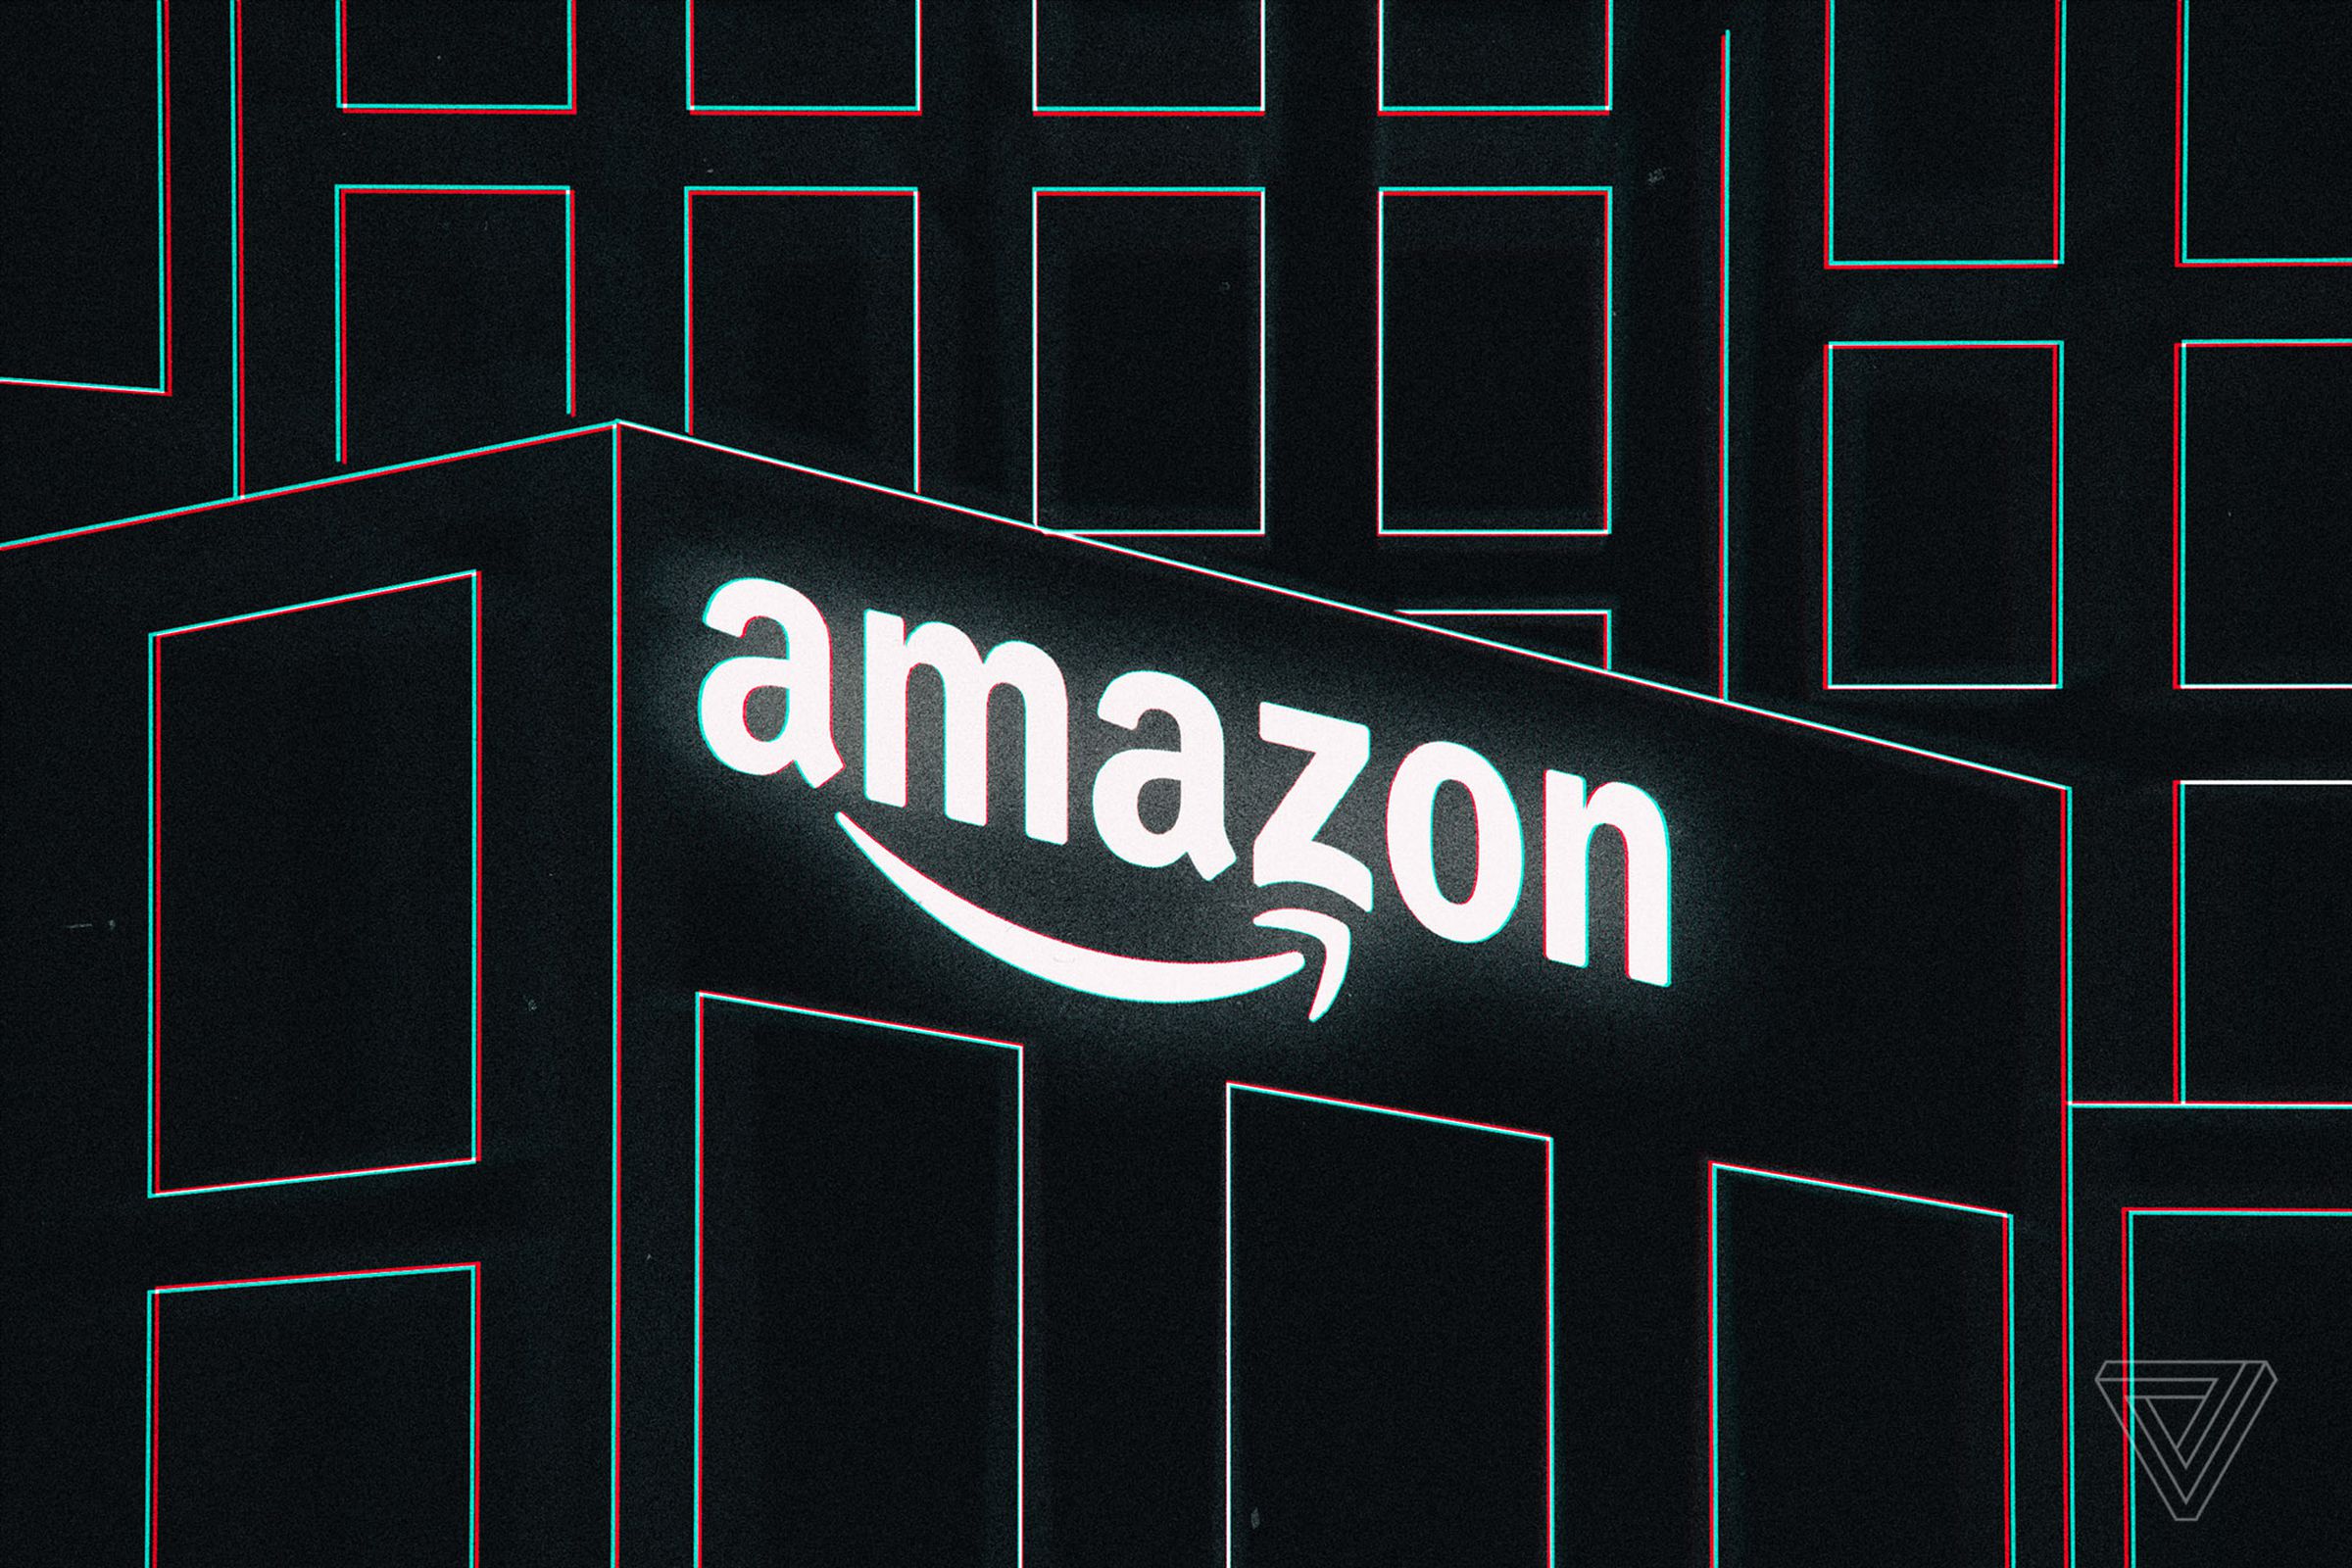 Amazon warehouse workers petition to unionize